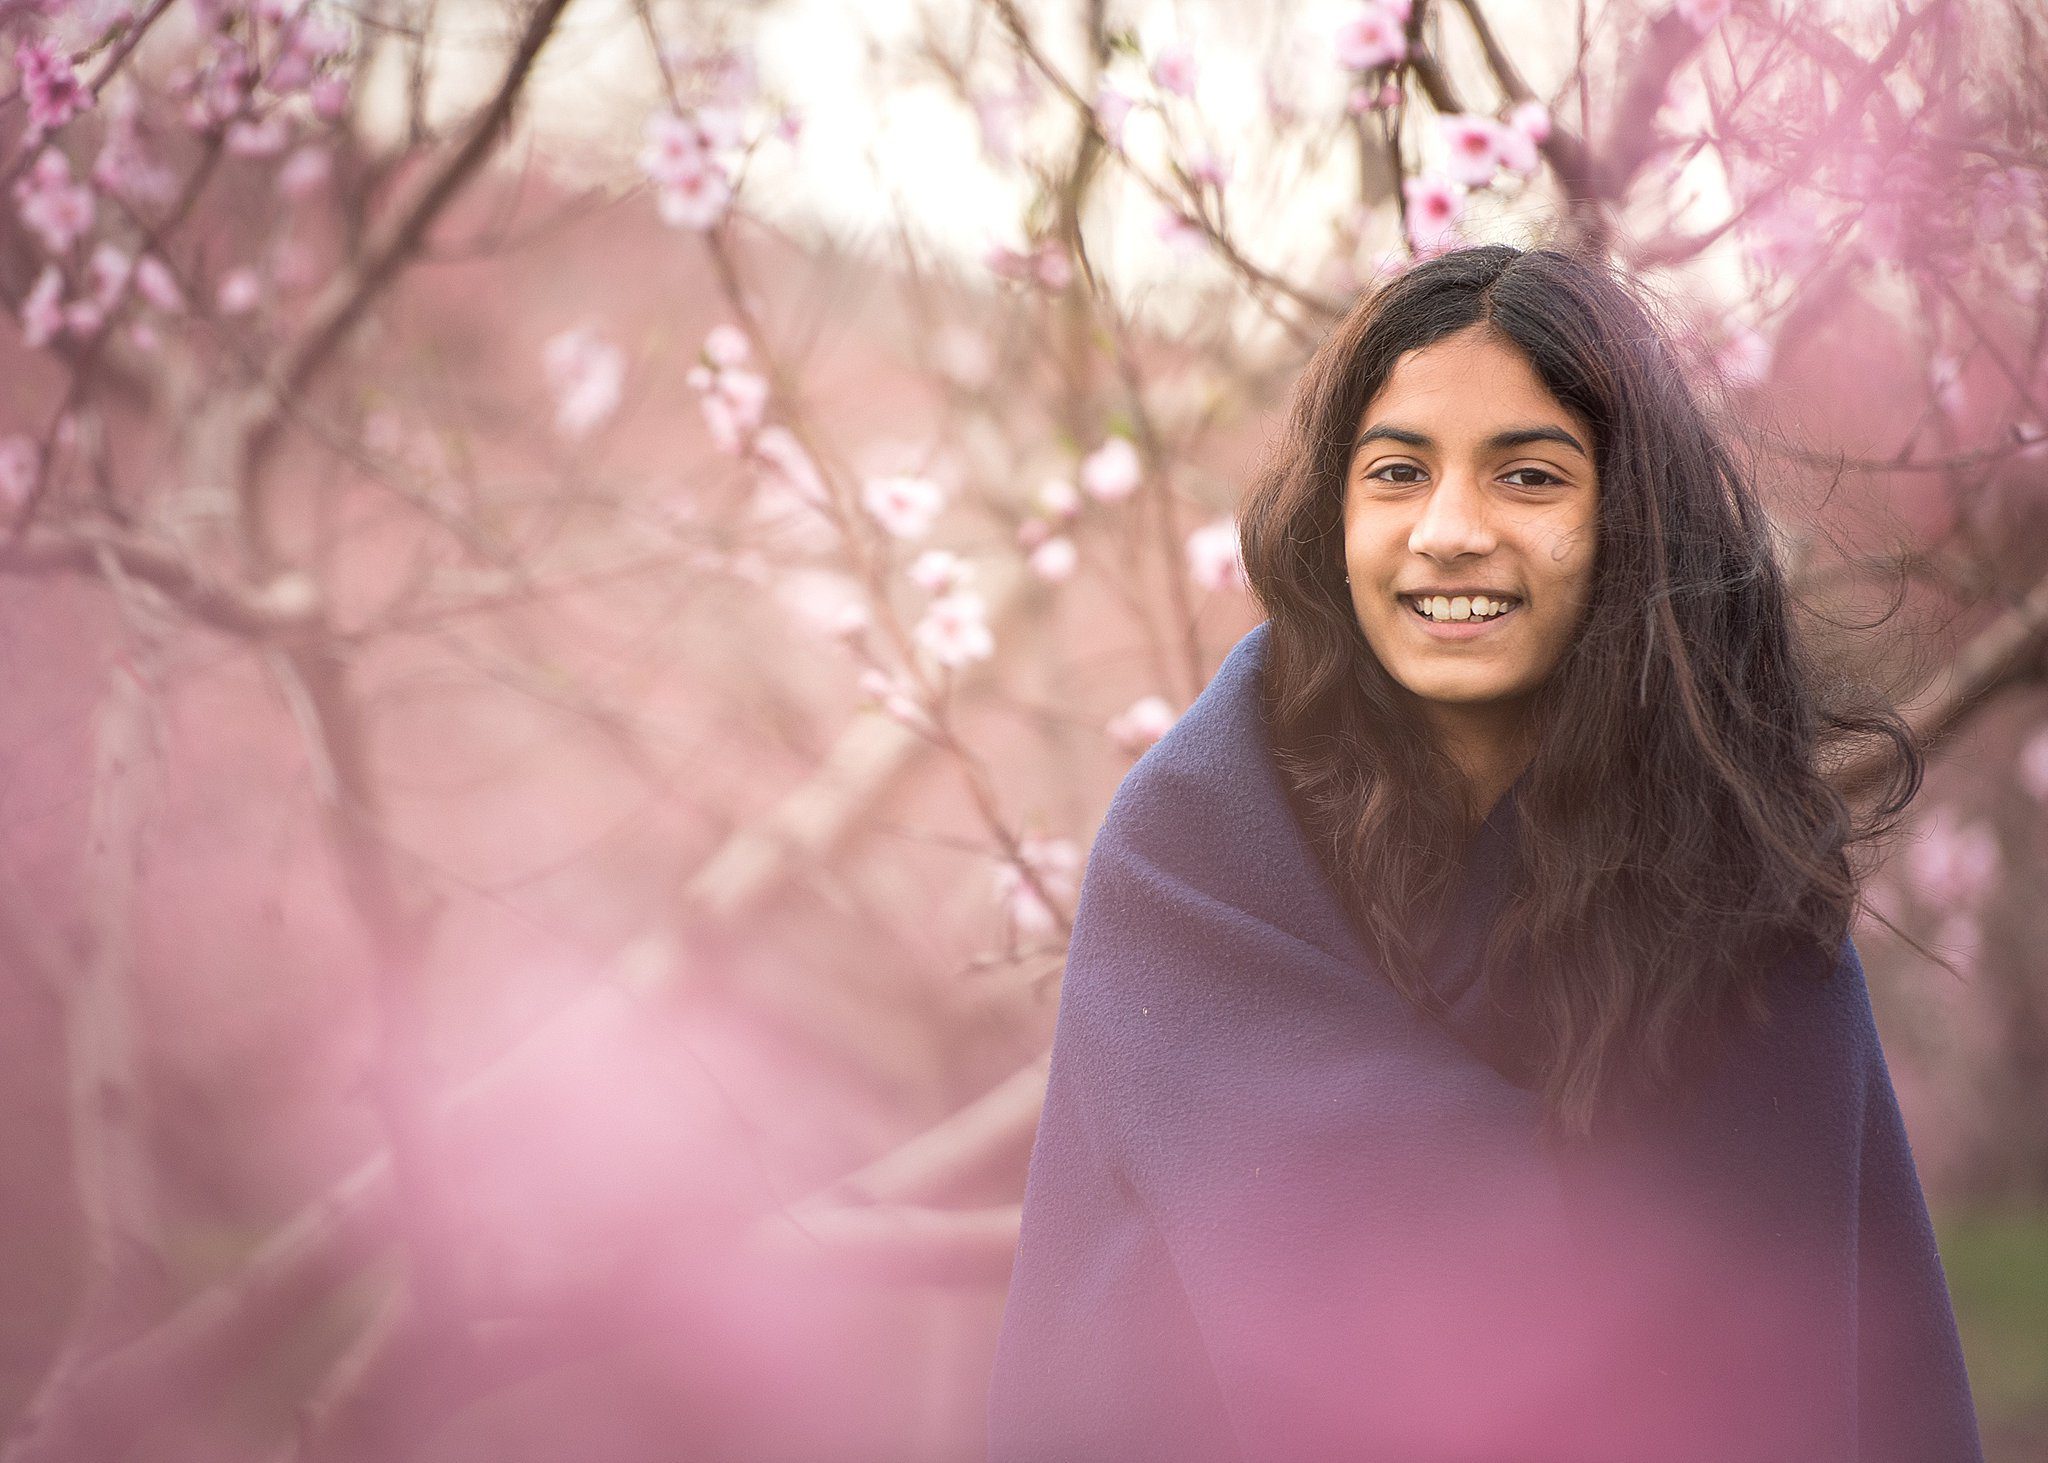 A young girl wrapped in a blue blanket stands amongst pink blooming trees